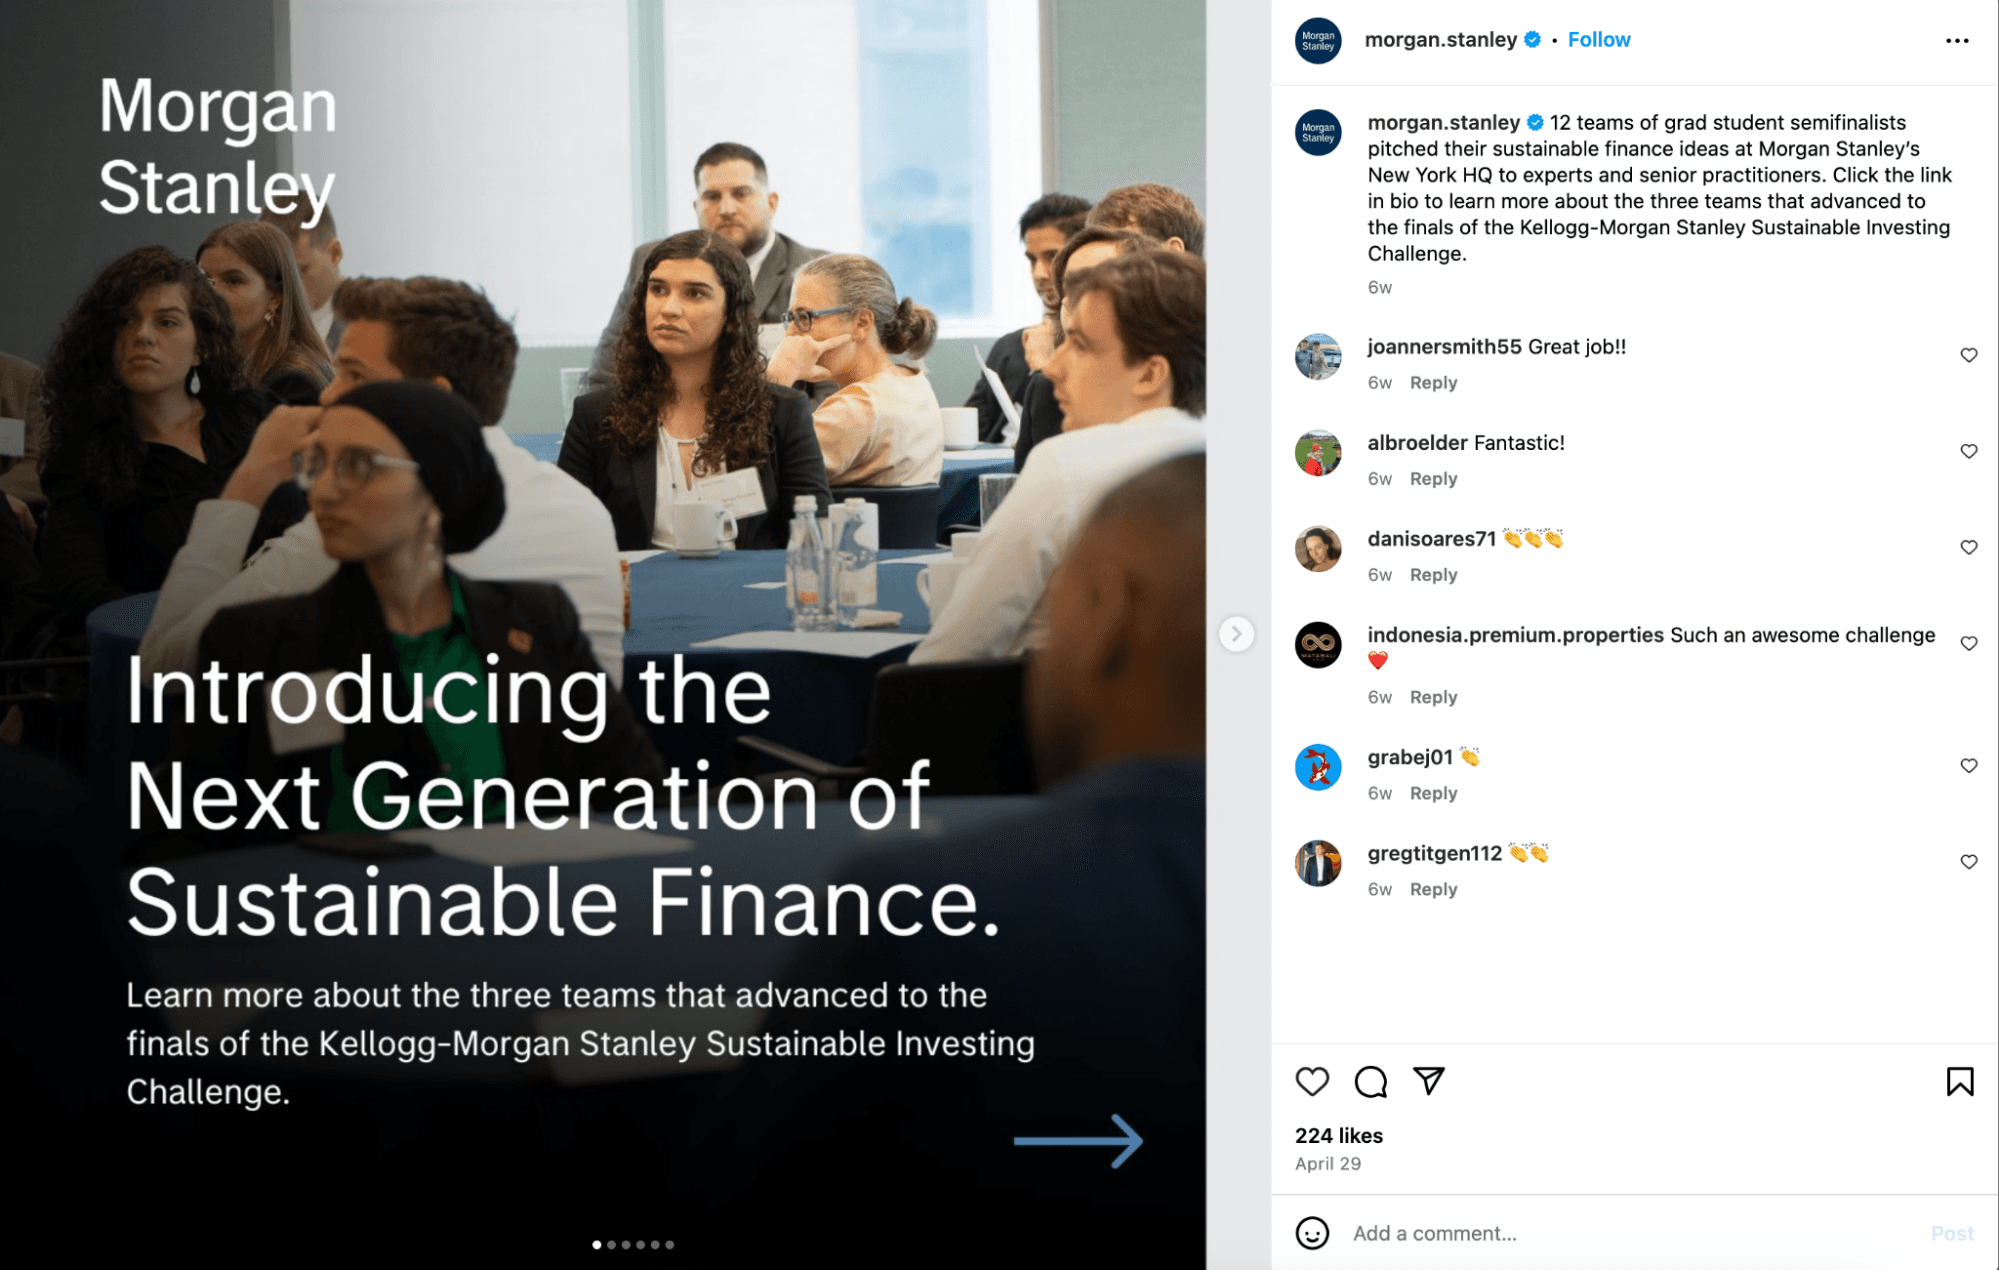 Morgan Stanley post their latest blogs and news on their Instagram